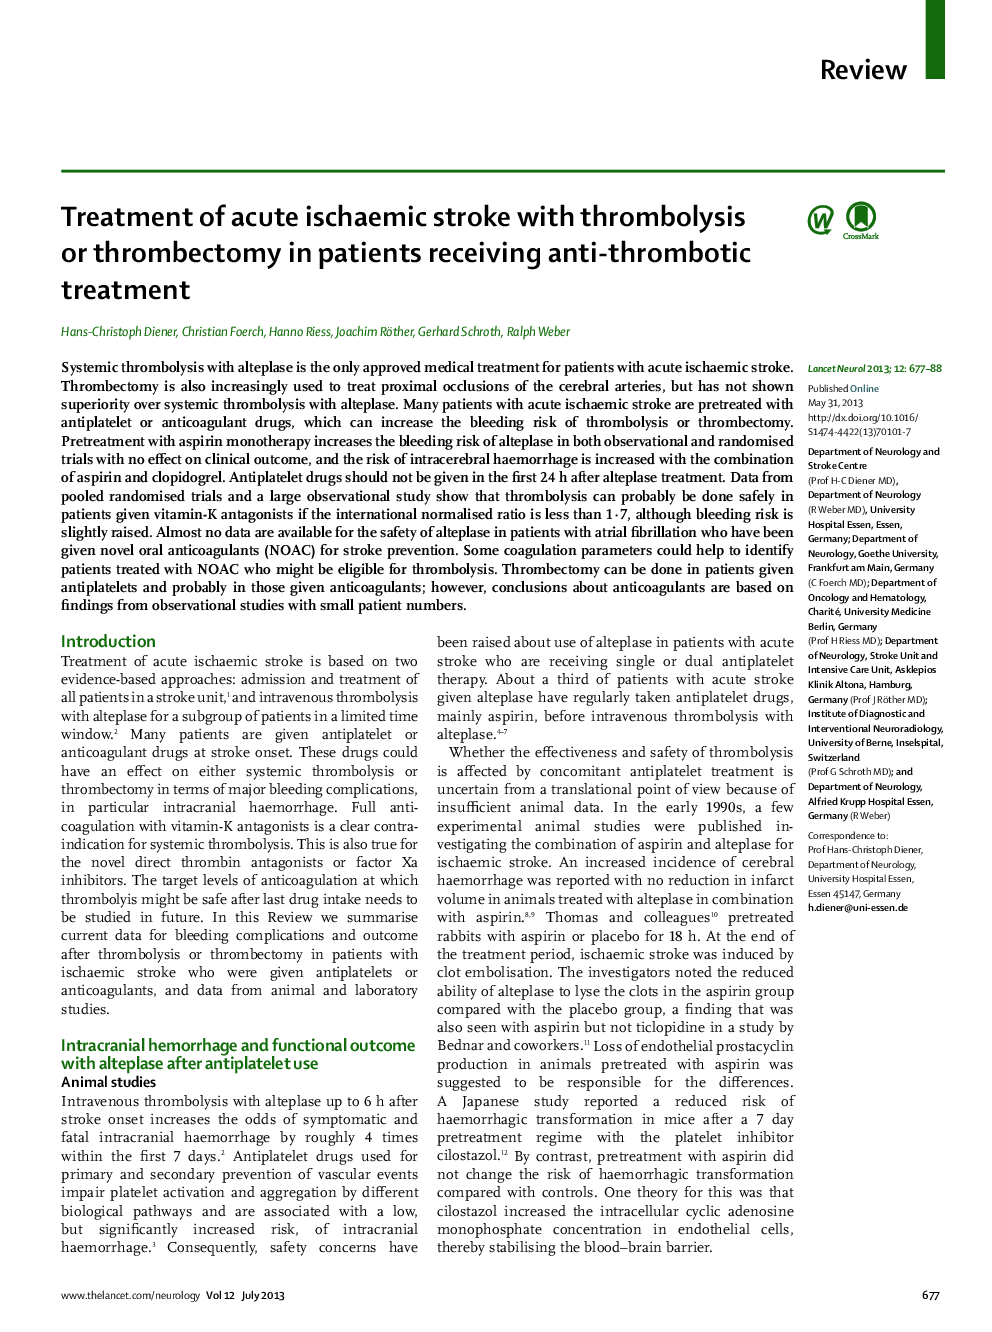 Treatment of acute ischaemic stroke with thrombolysis or thrombectomy in patients receiving anti-thrombotic treatment